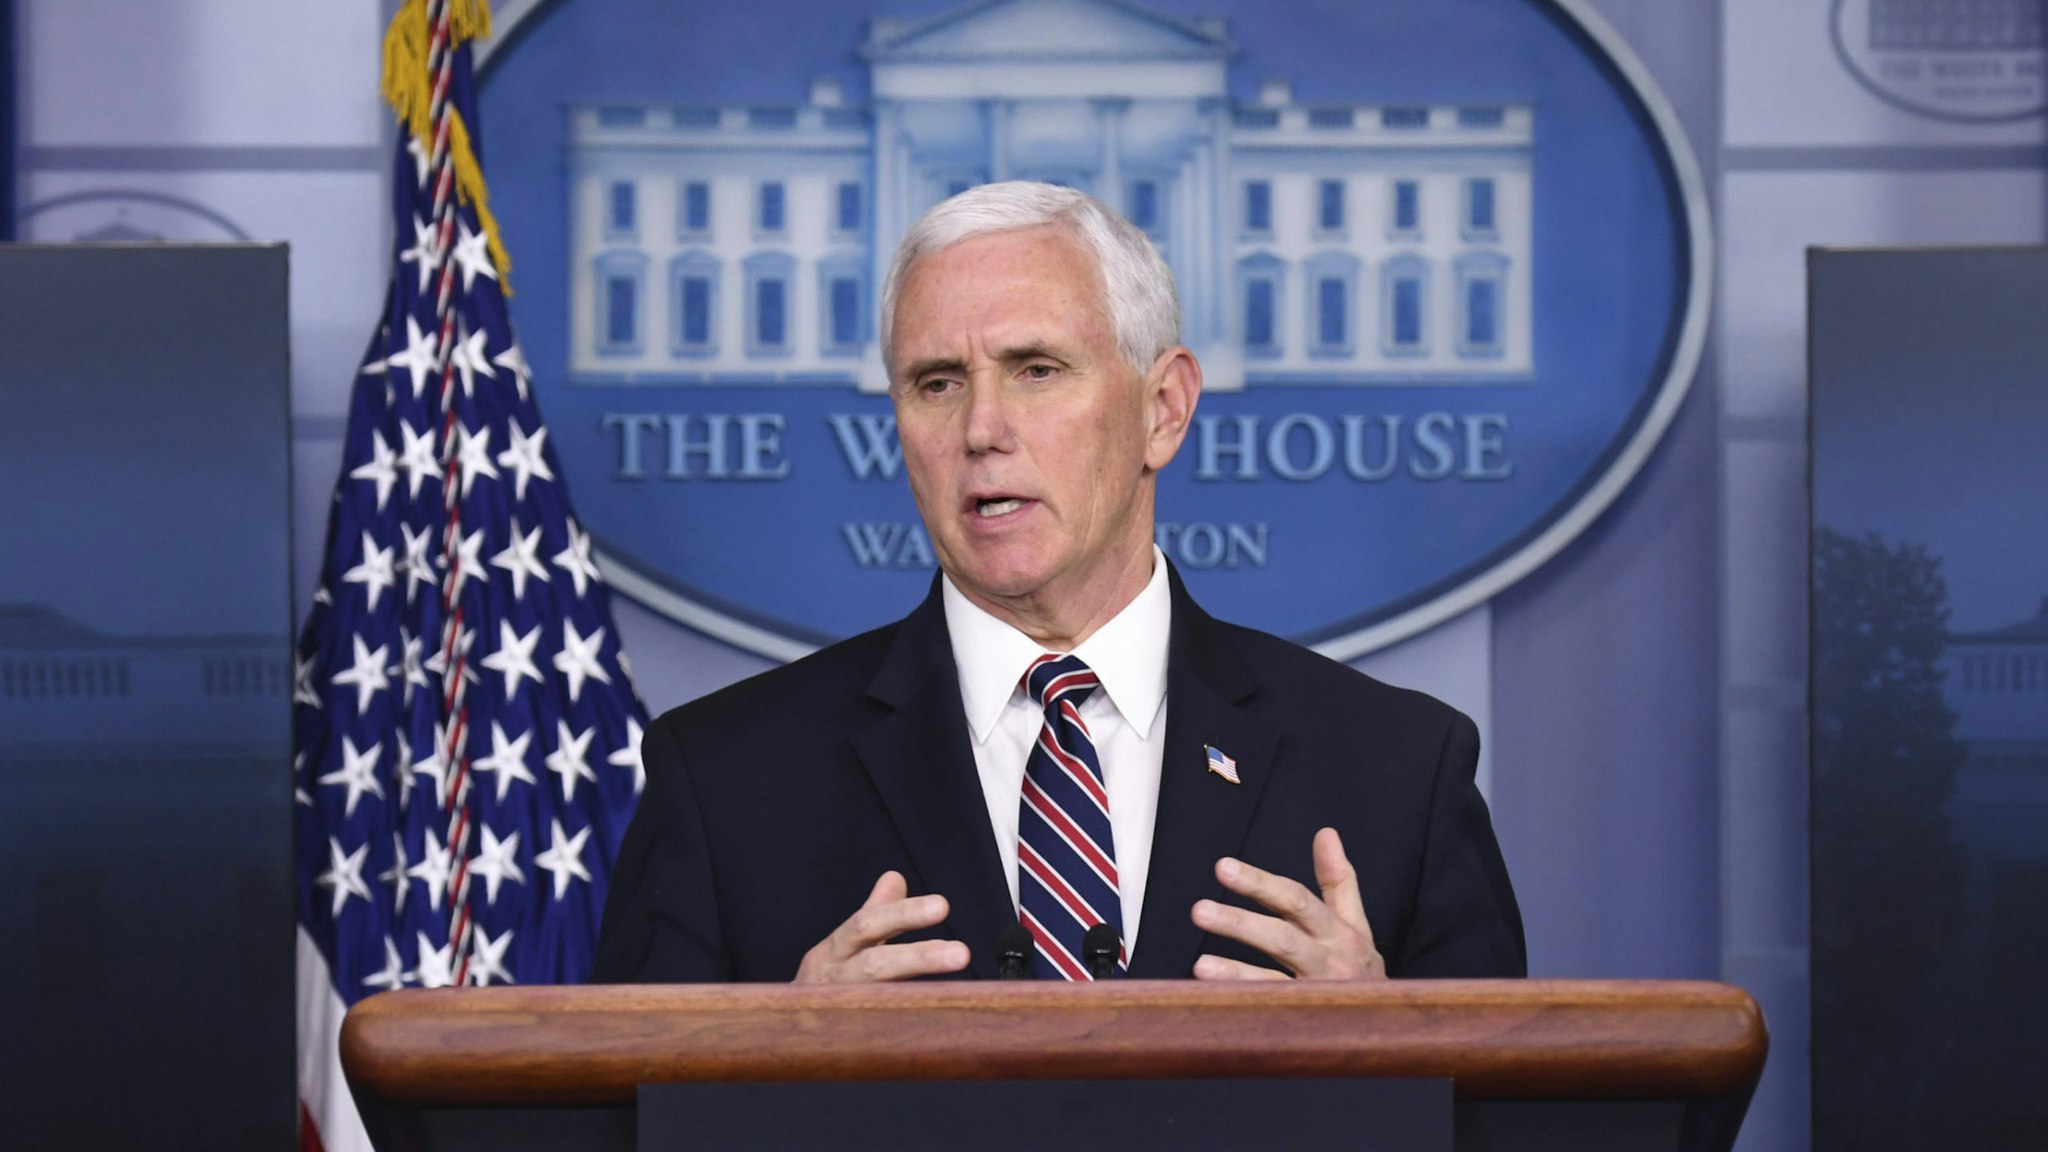 U.S. Vice President Mike Pence speaks during a Coronavirus Task Force news conference at the White House in Washington, D.C., U.S., on Thursday, April 2, 2020.